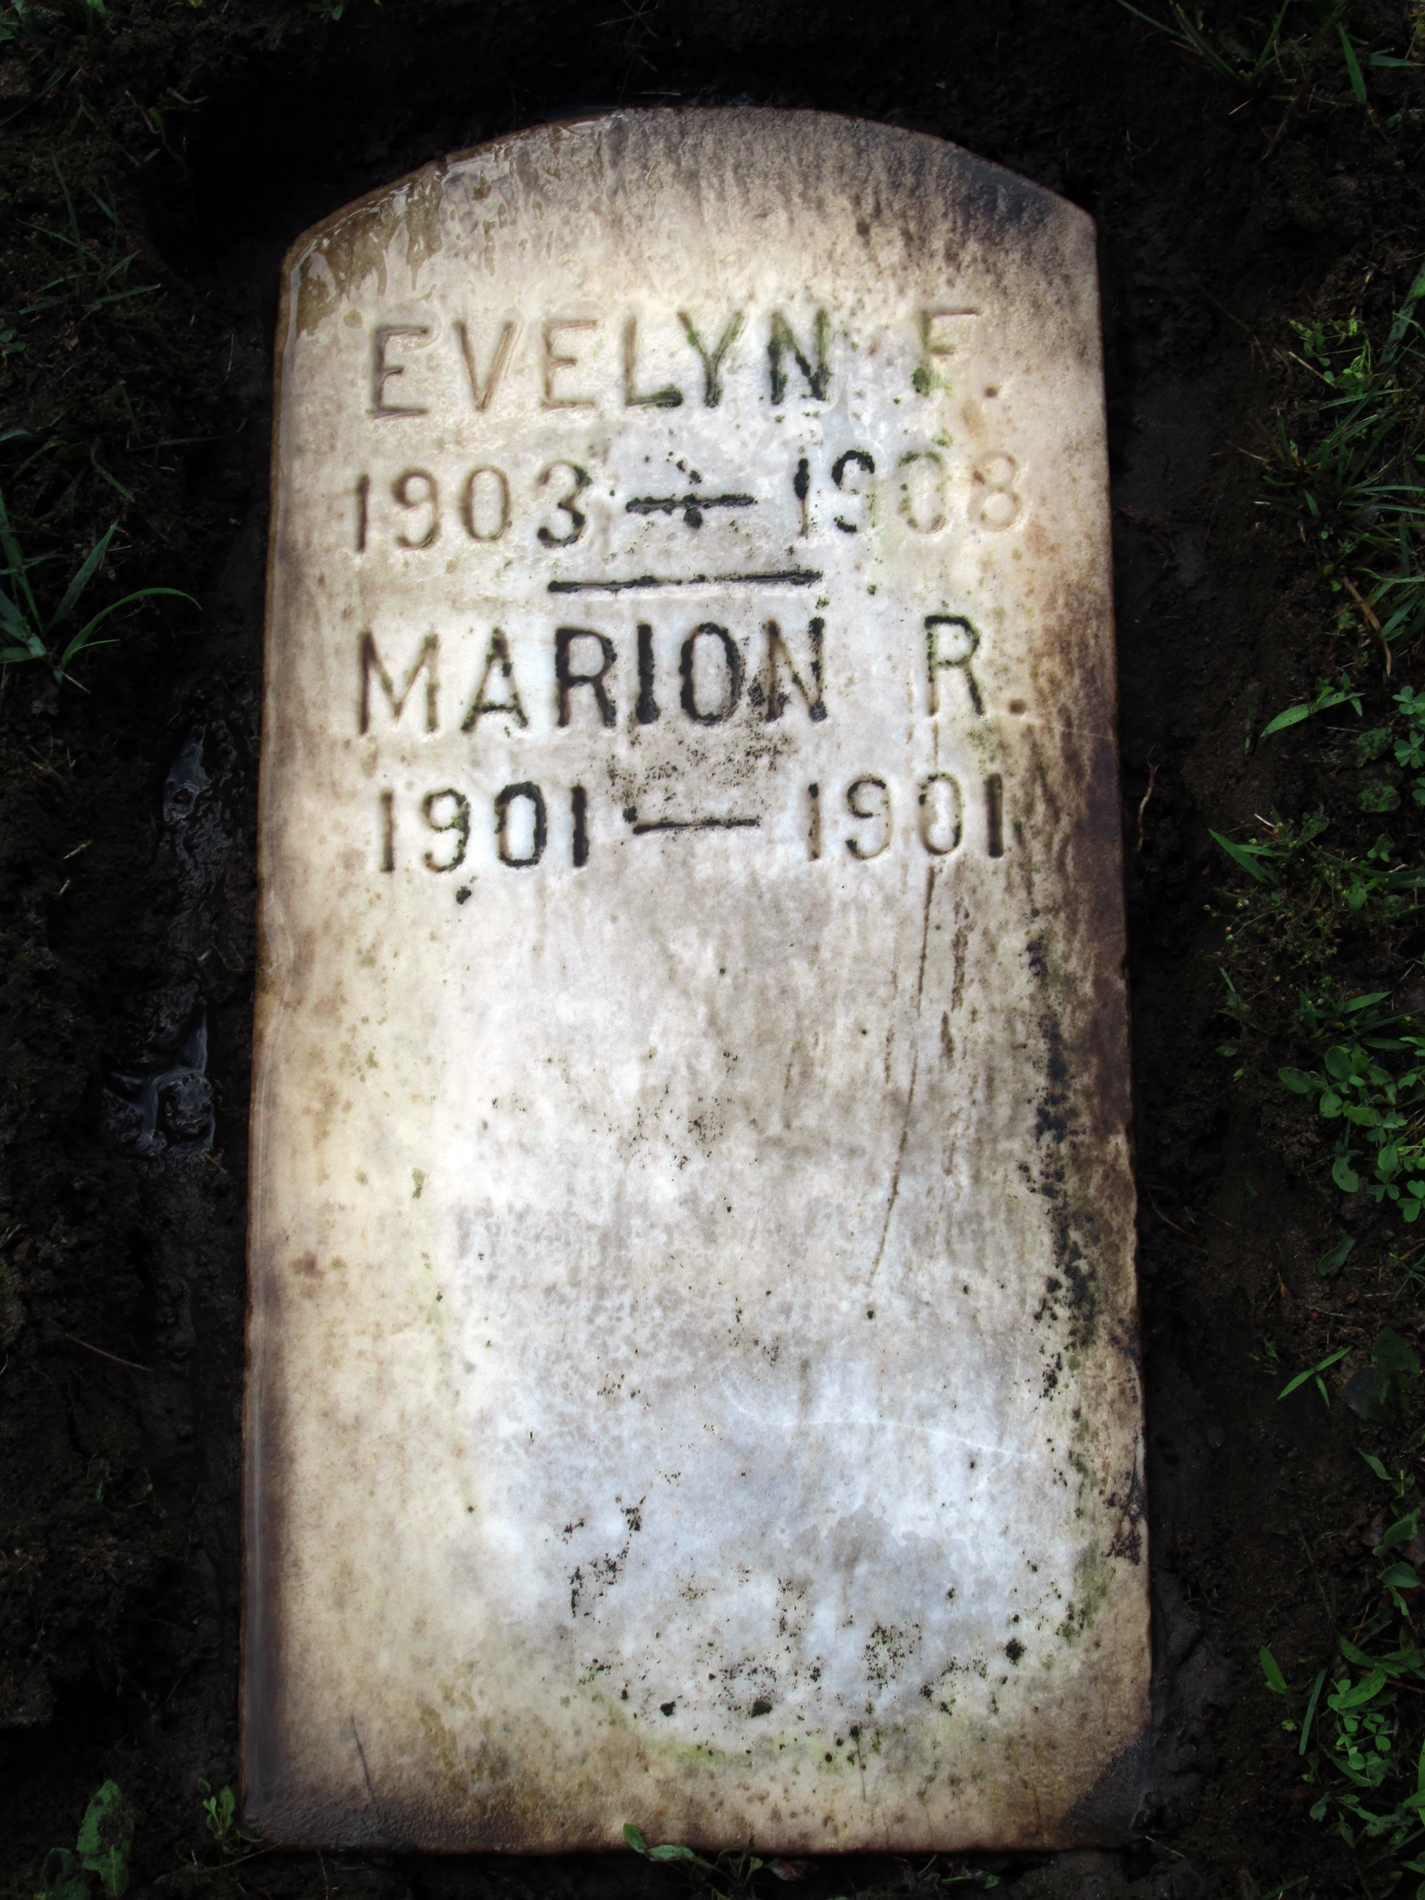 Evelyn and Marion